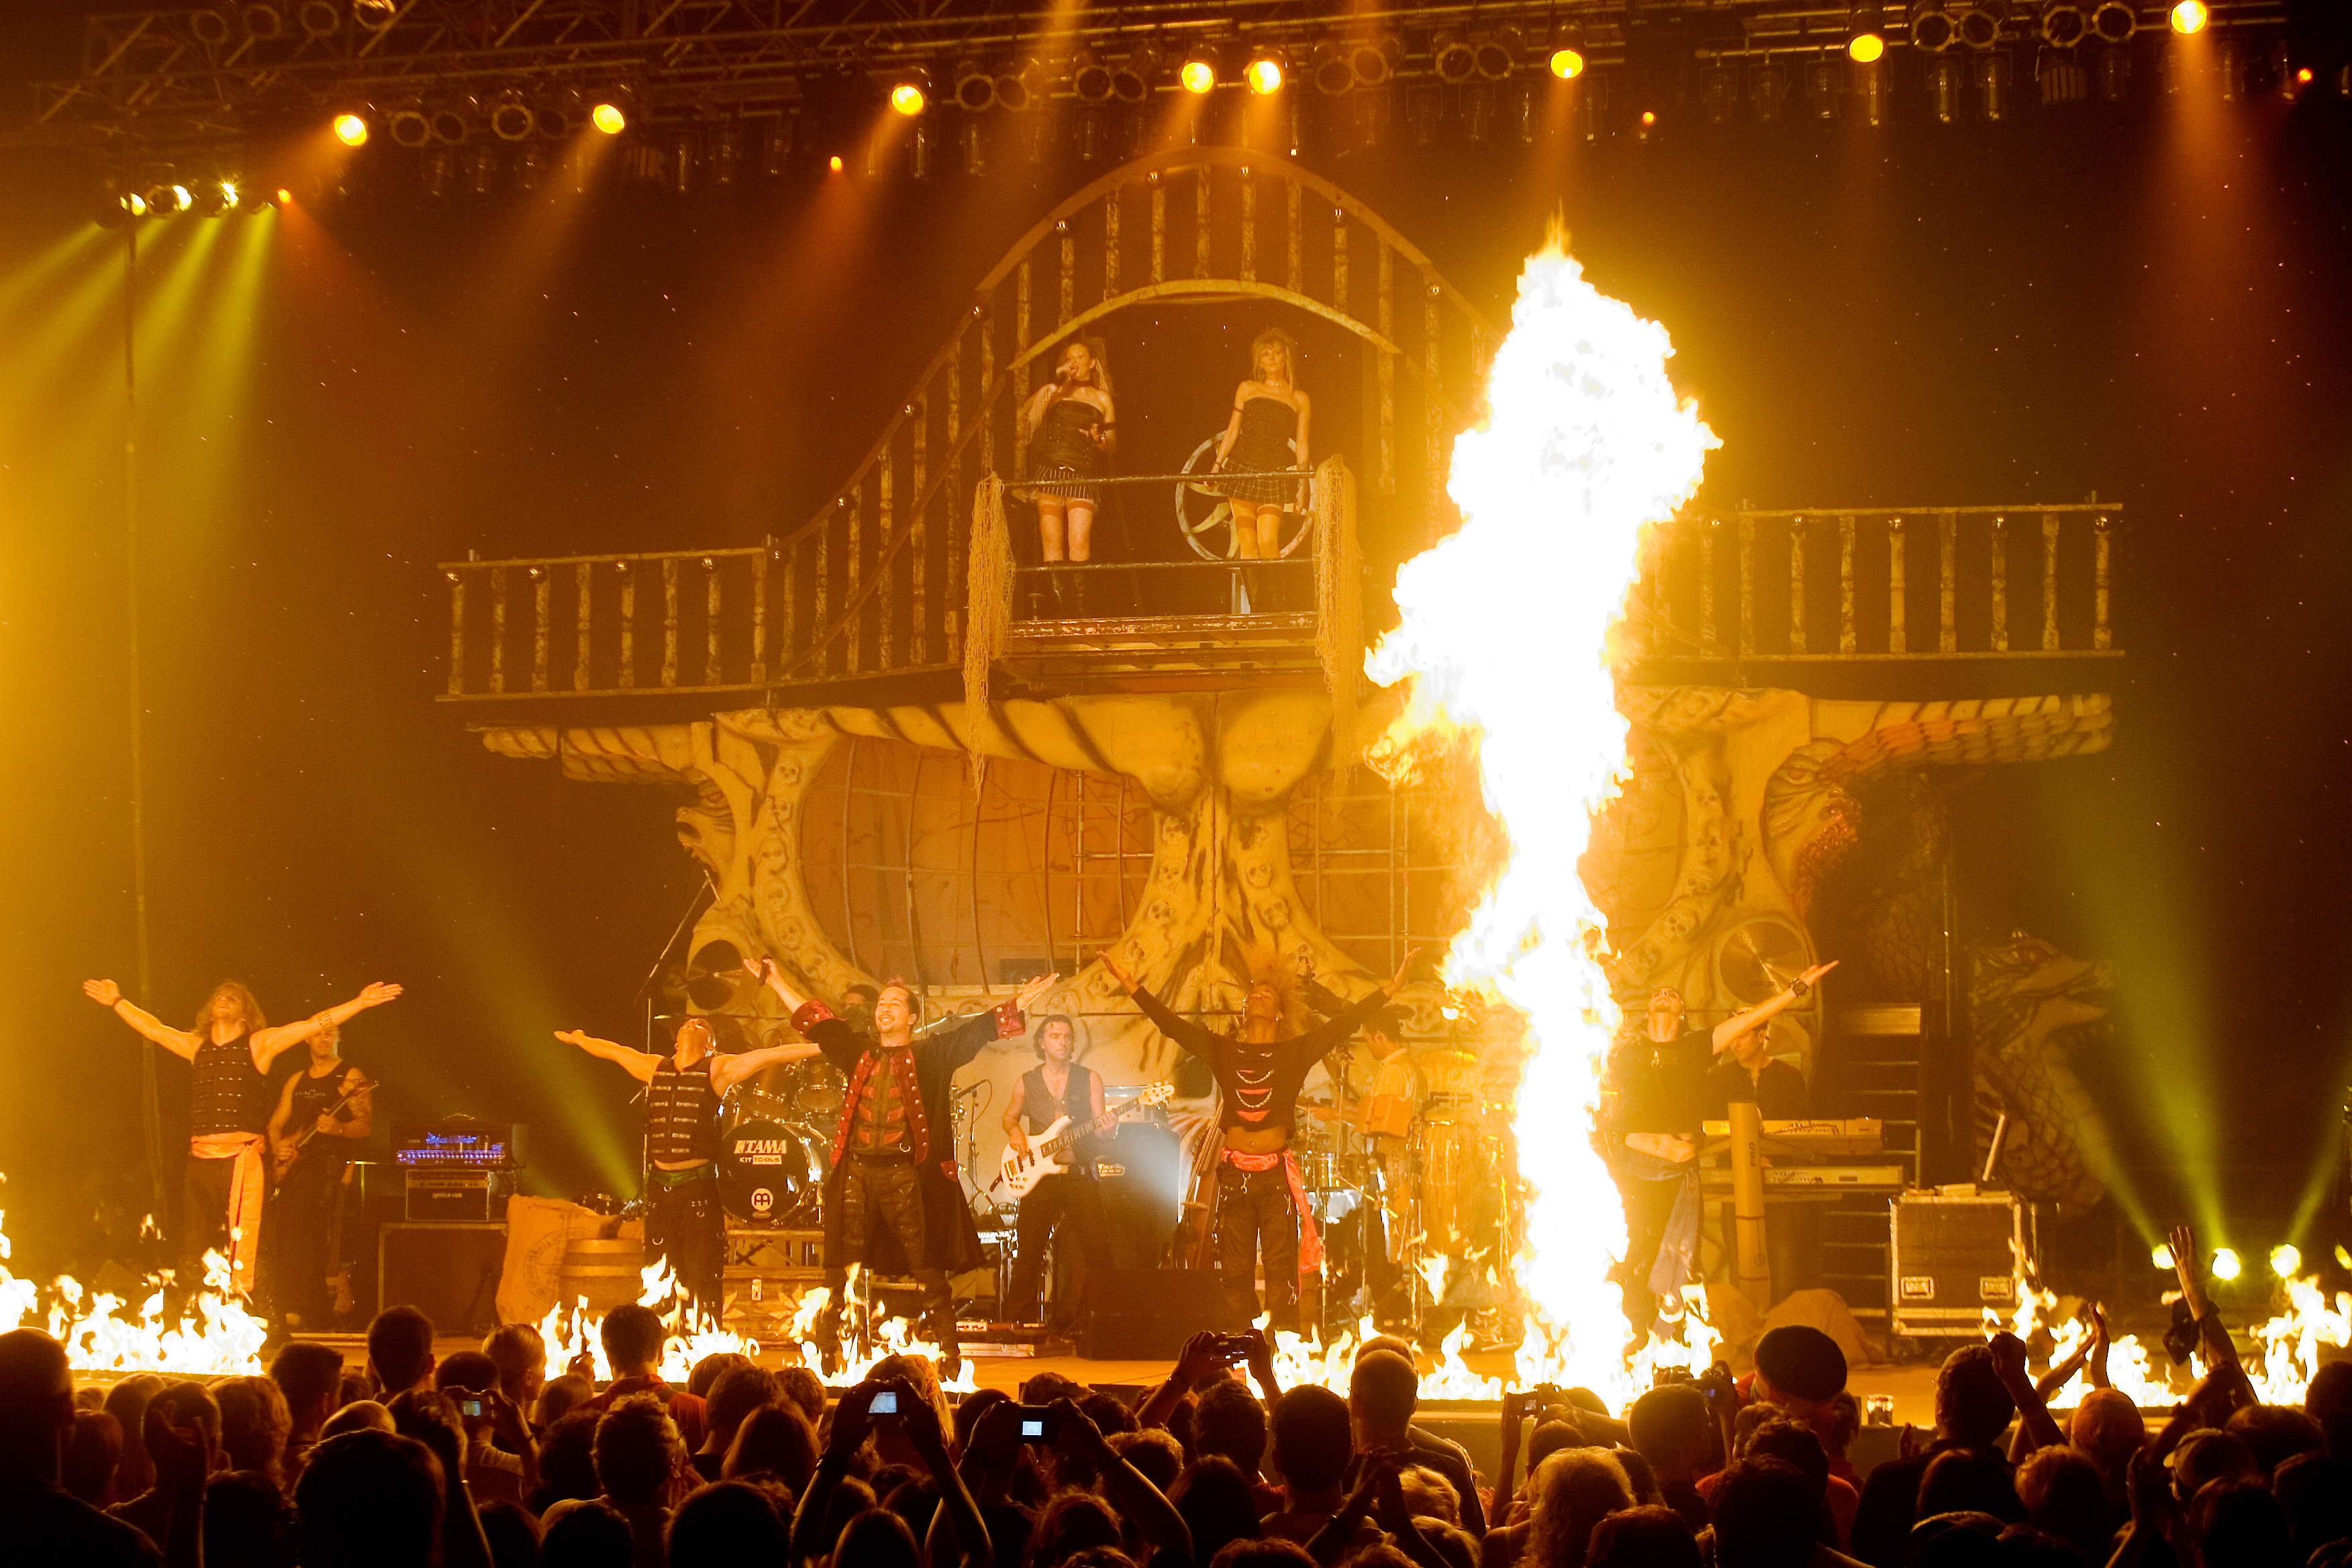 Big stage with performers and fire and lighting during a show